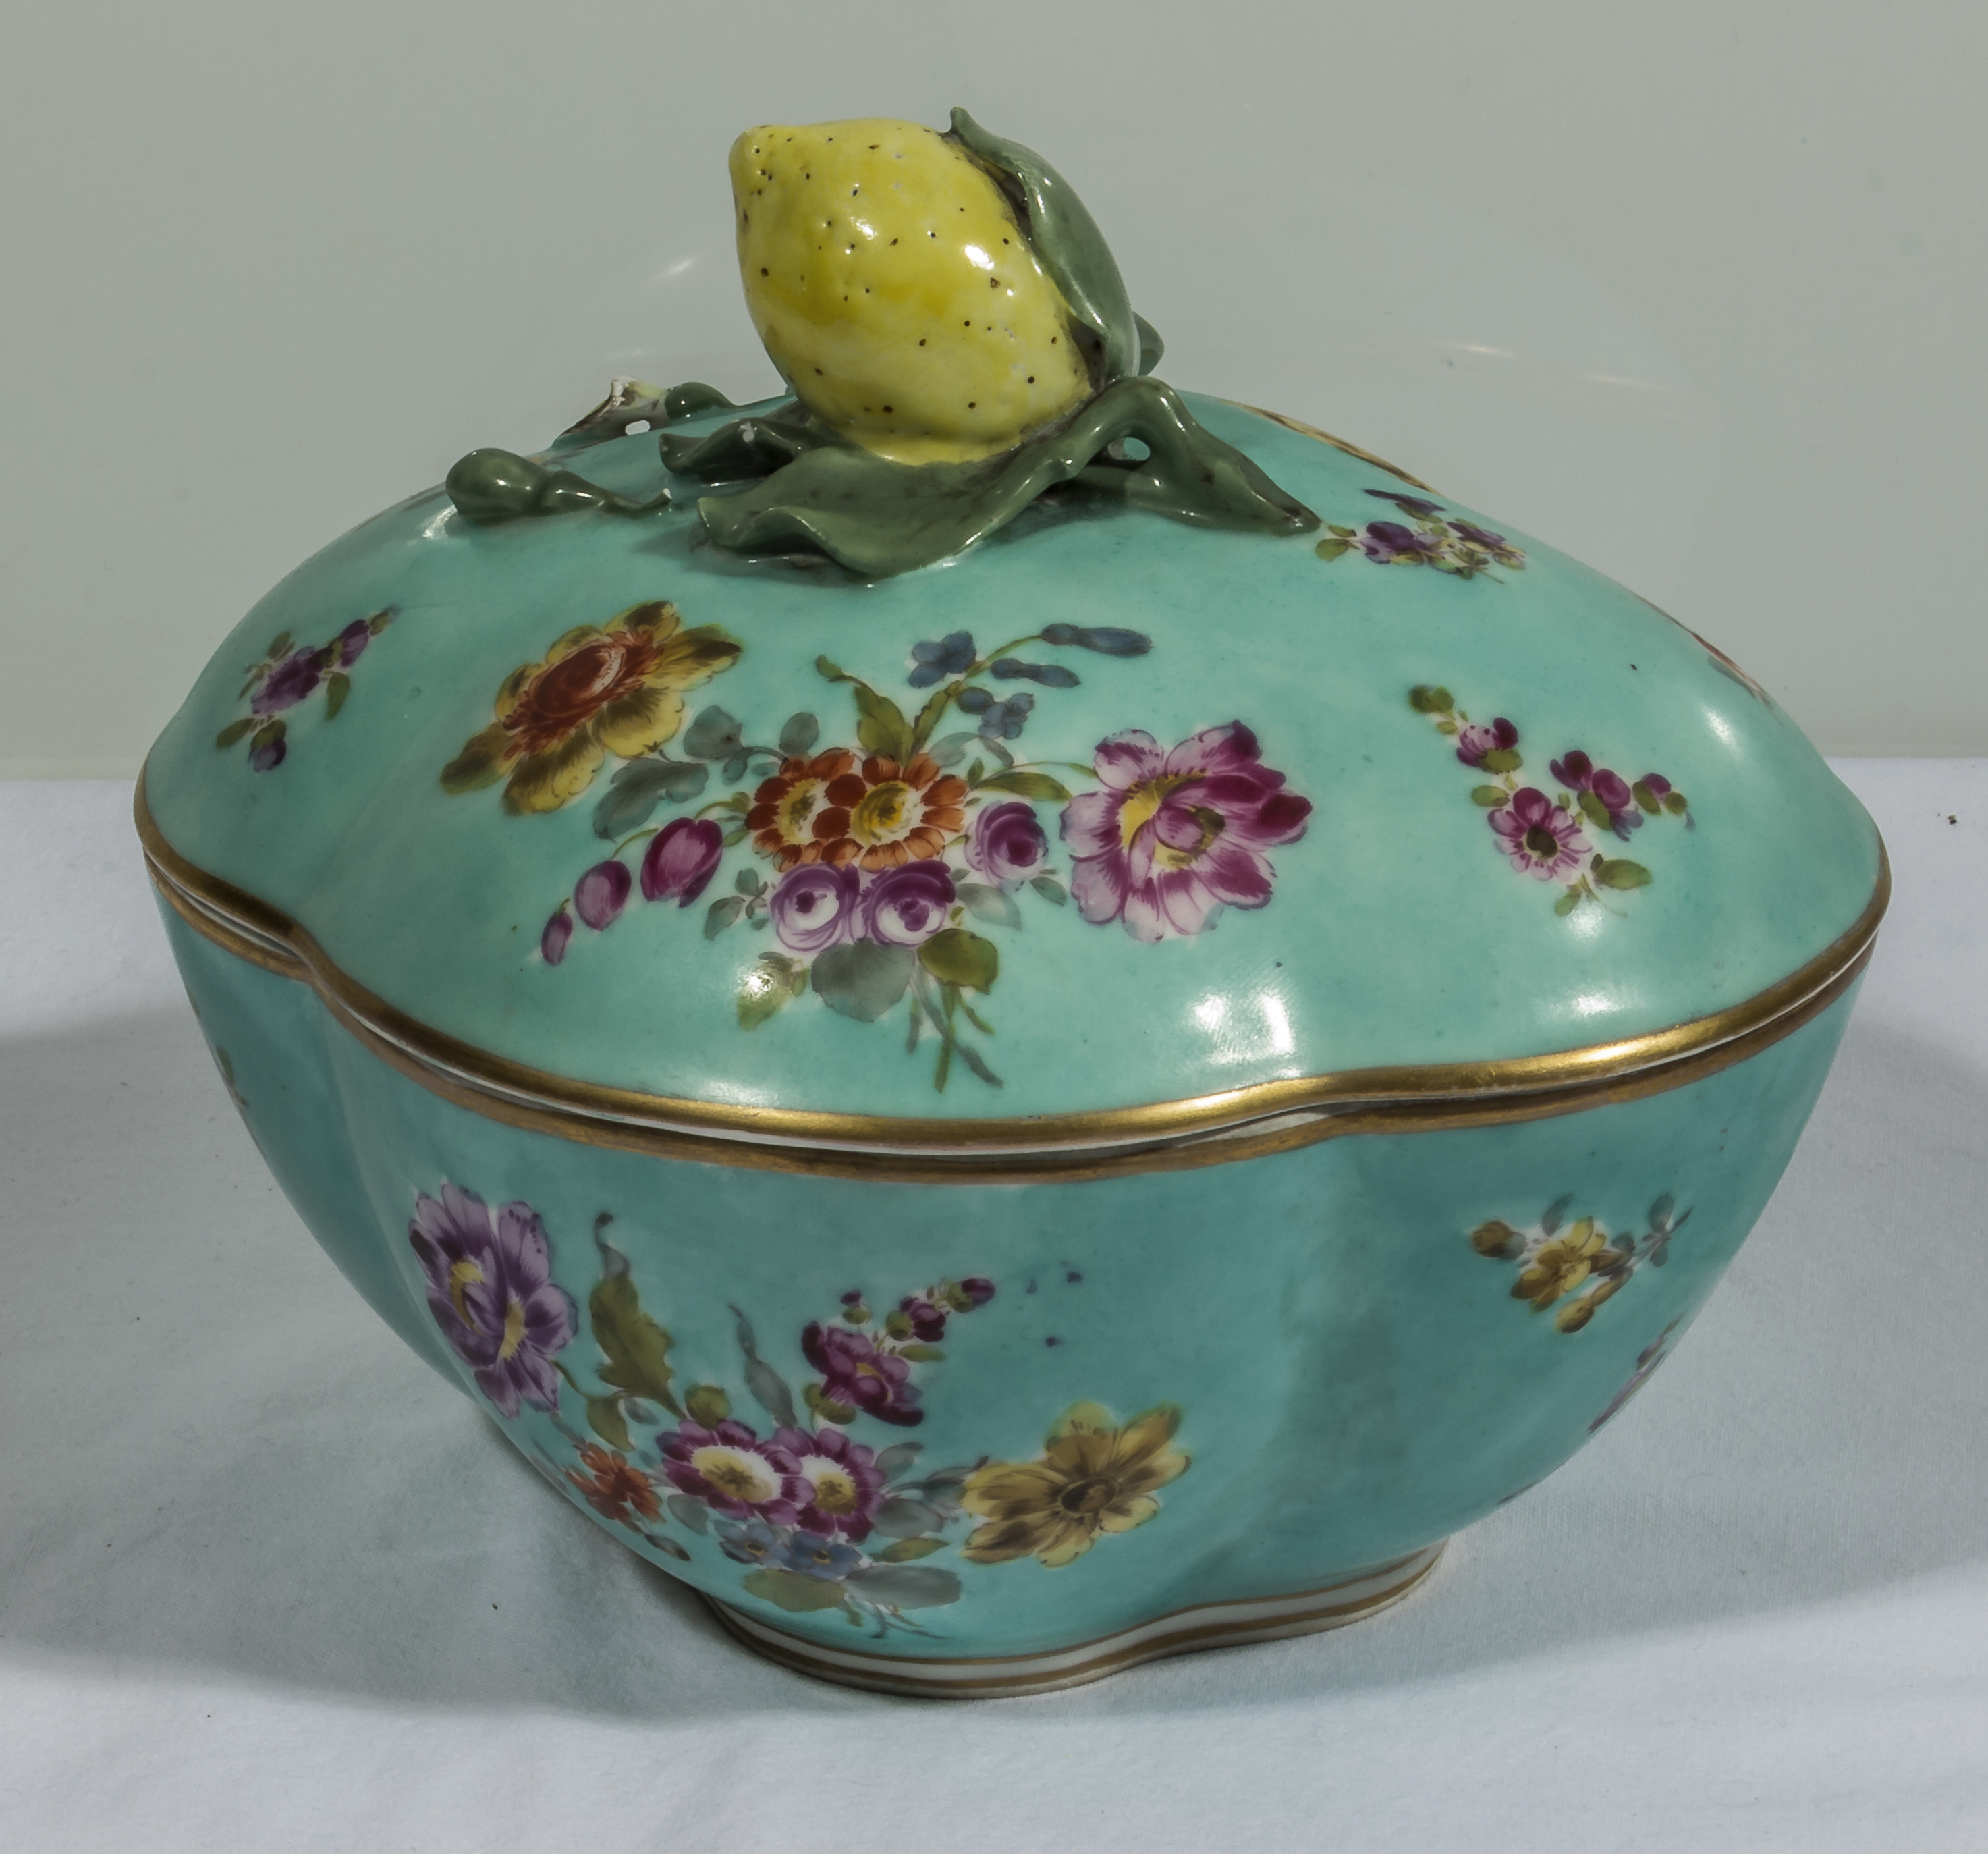 A 19th century lidded bowl possibly Helena Wolfsohn with interlinked A and R mark to base, some loss